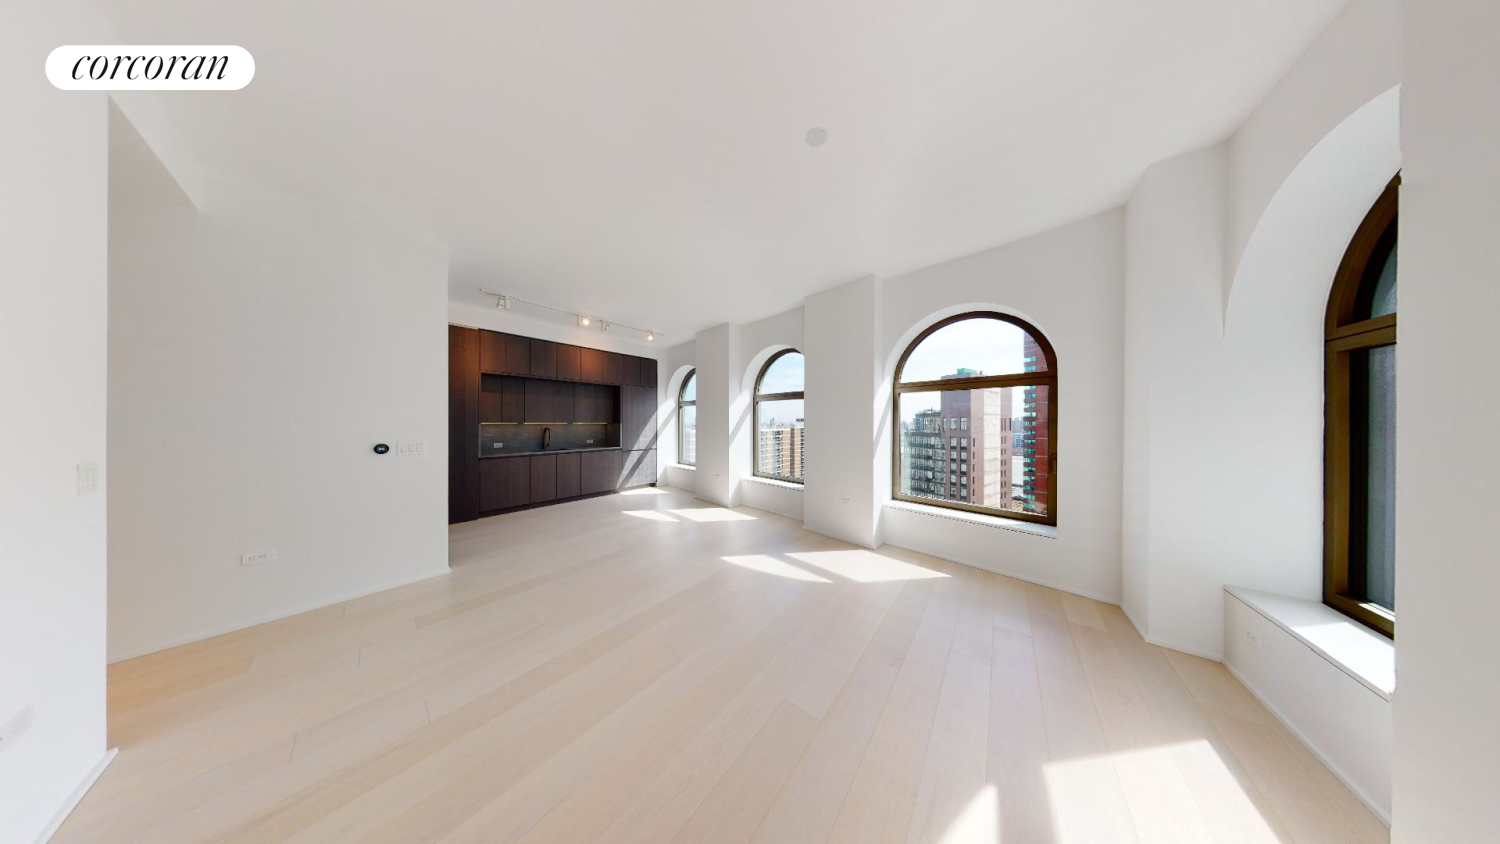 130 William Street 23D, Lower Manhattan, Downtown, NYC - 2 Bedrooms  
2 Bathrooms  
4 Rooms - 